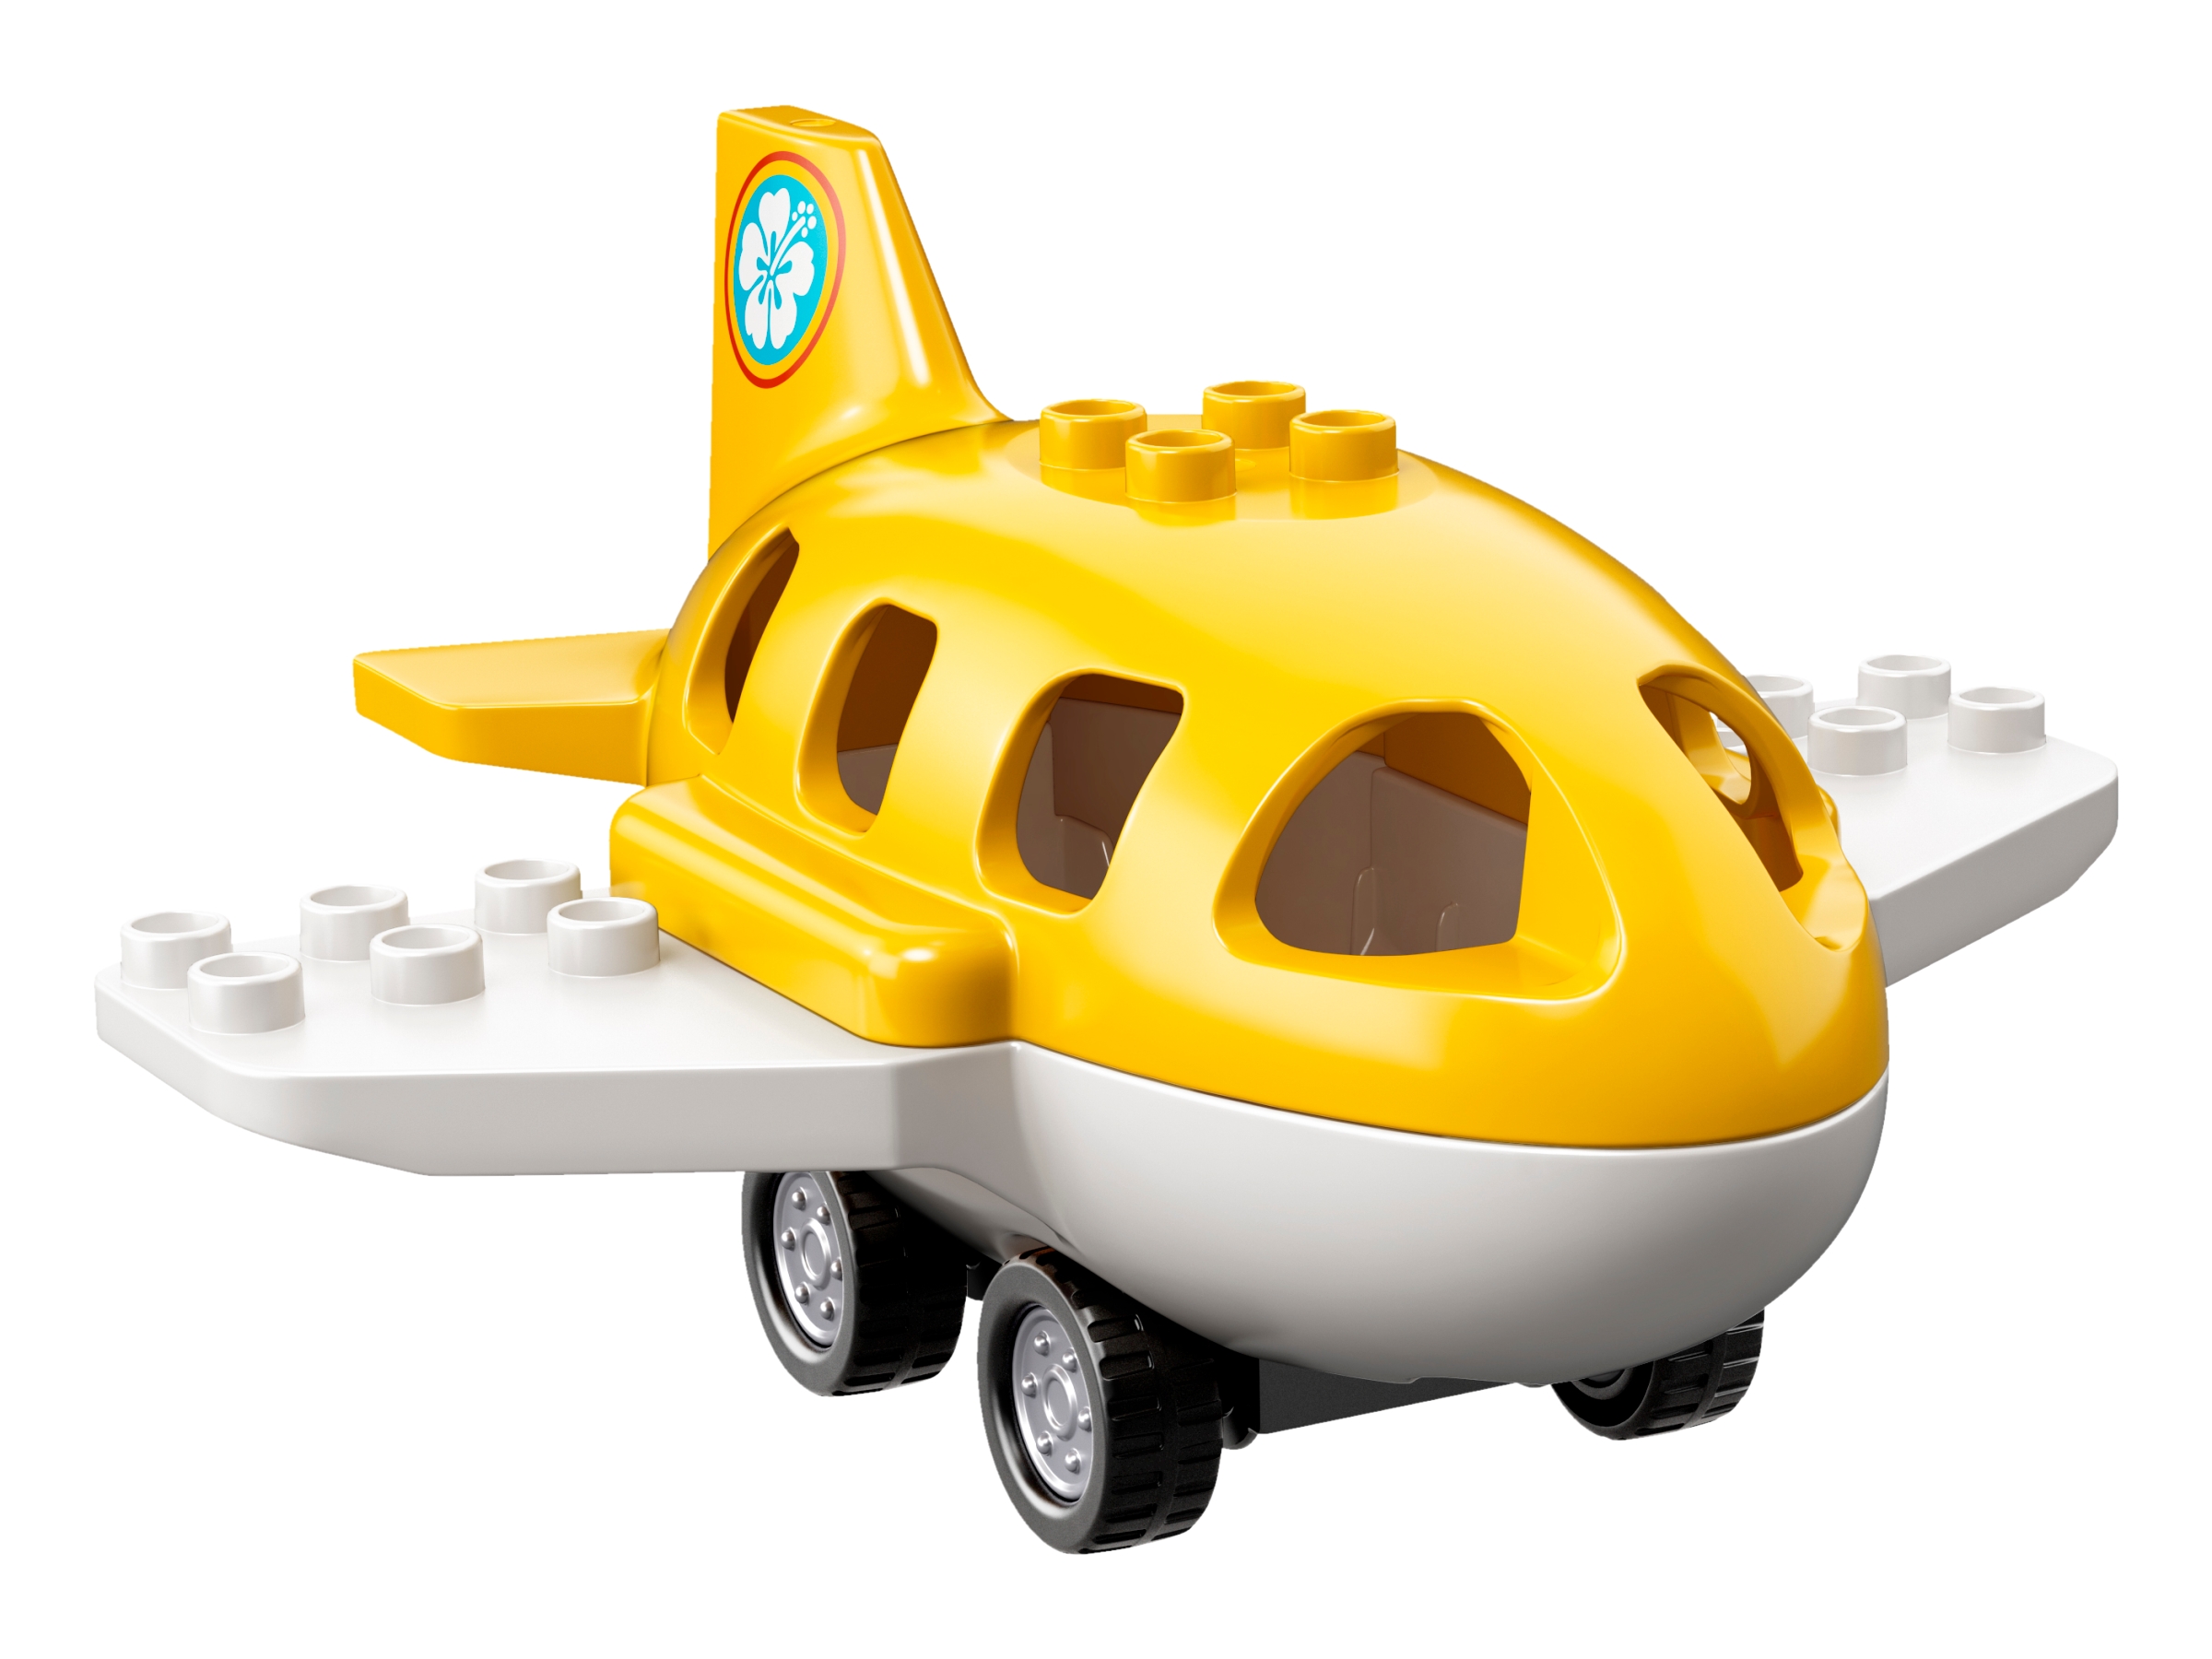 Airport 10871 | DUPLO® | Buy online at Official LEGO® Shop US